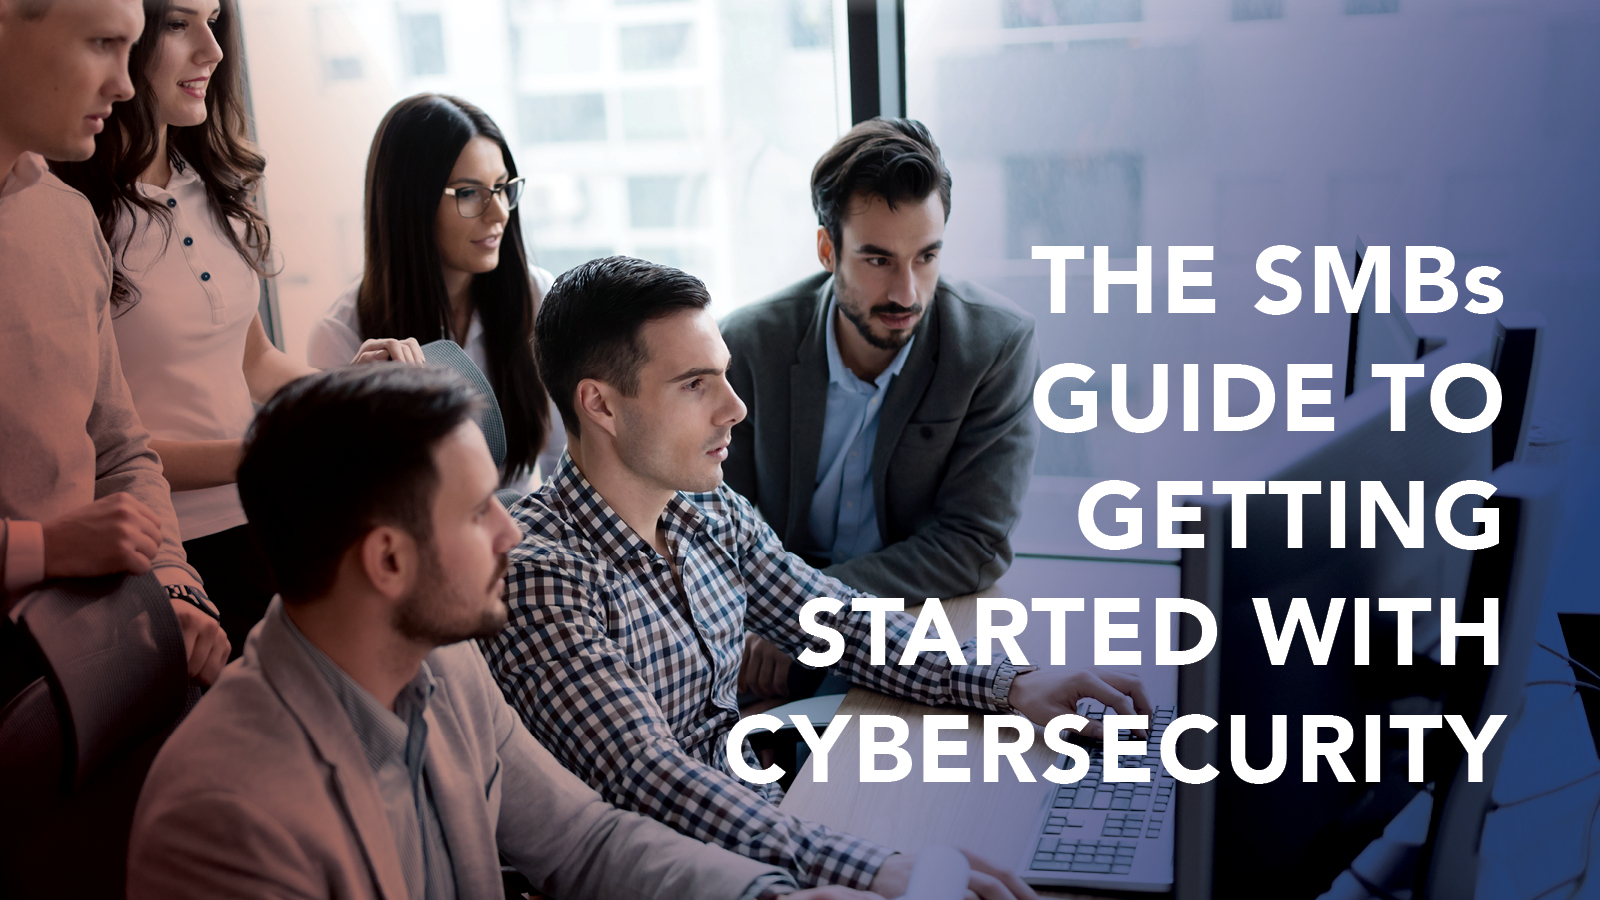 The SMB's Guide to Getting Started With Cybersecurity